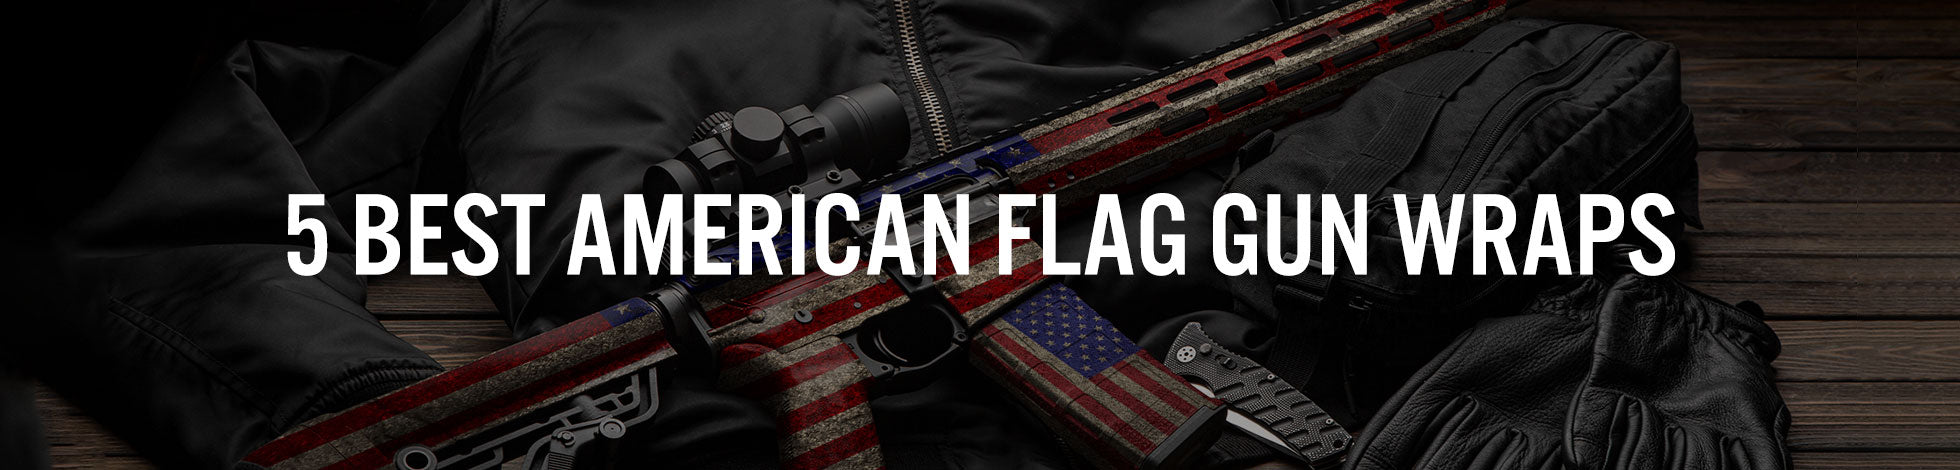 5 Best Patriotic American Flag Patterns for Firearms